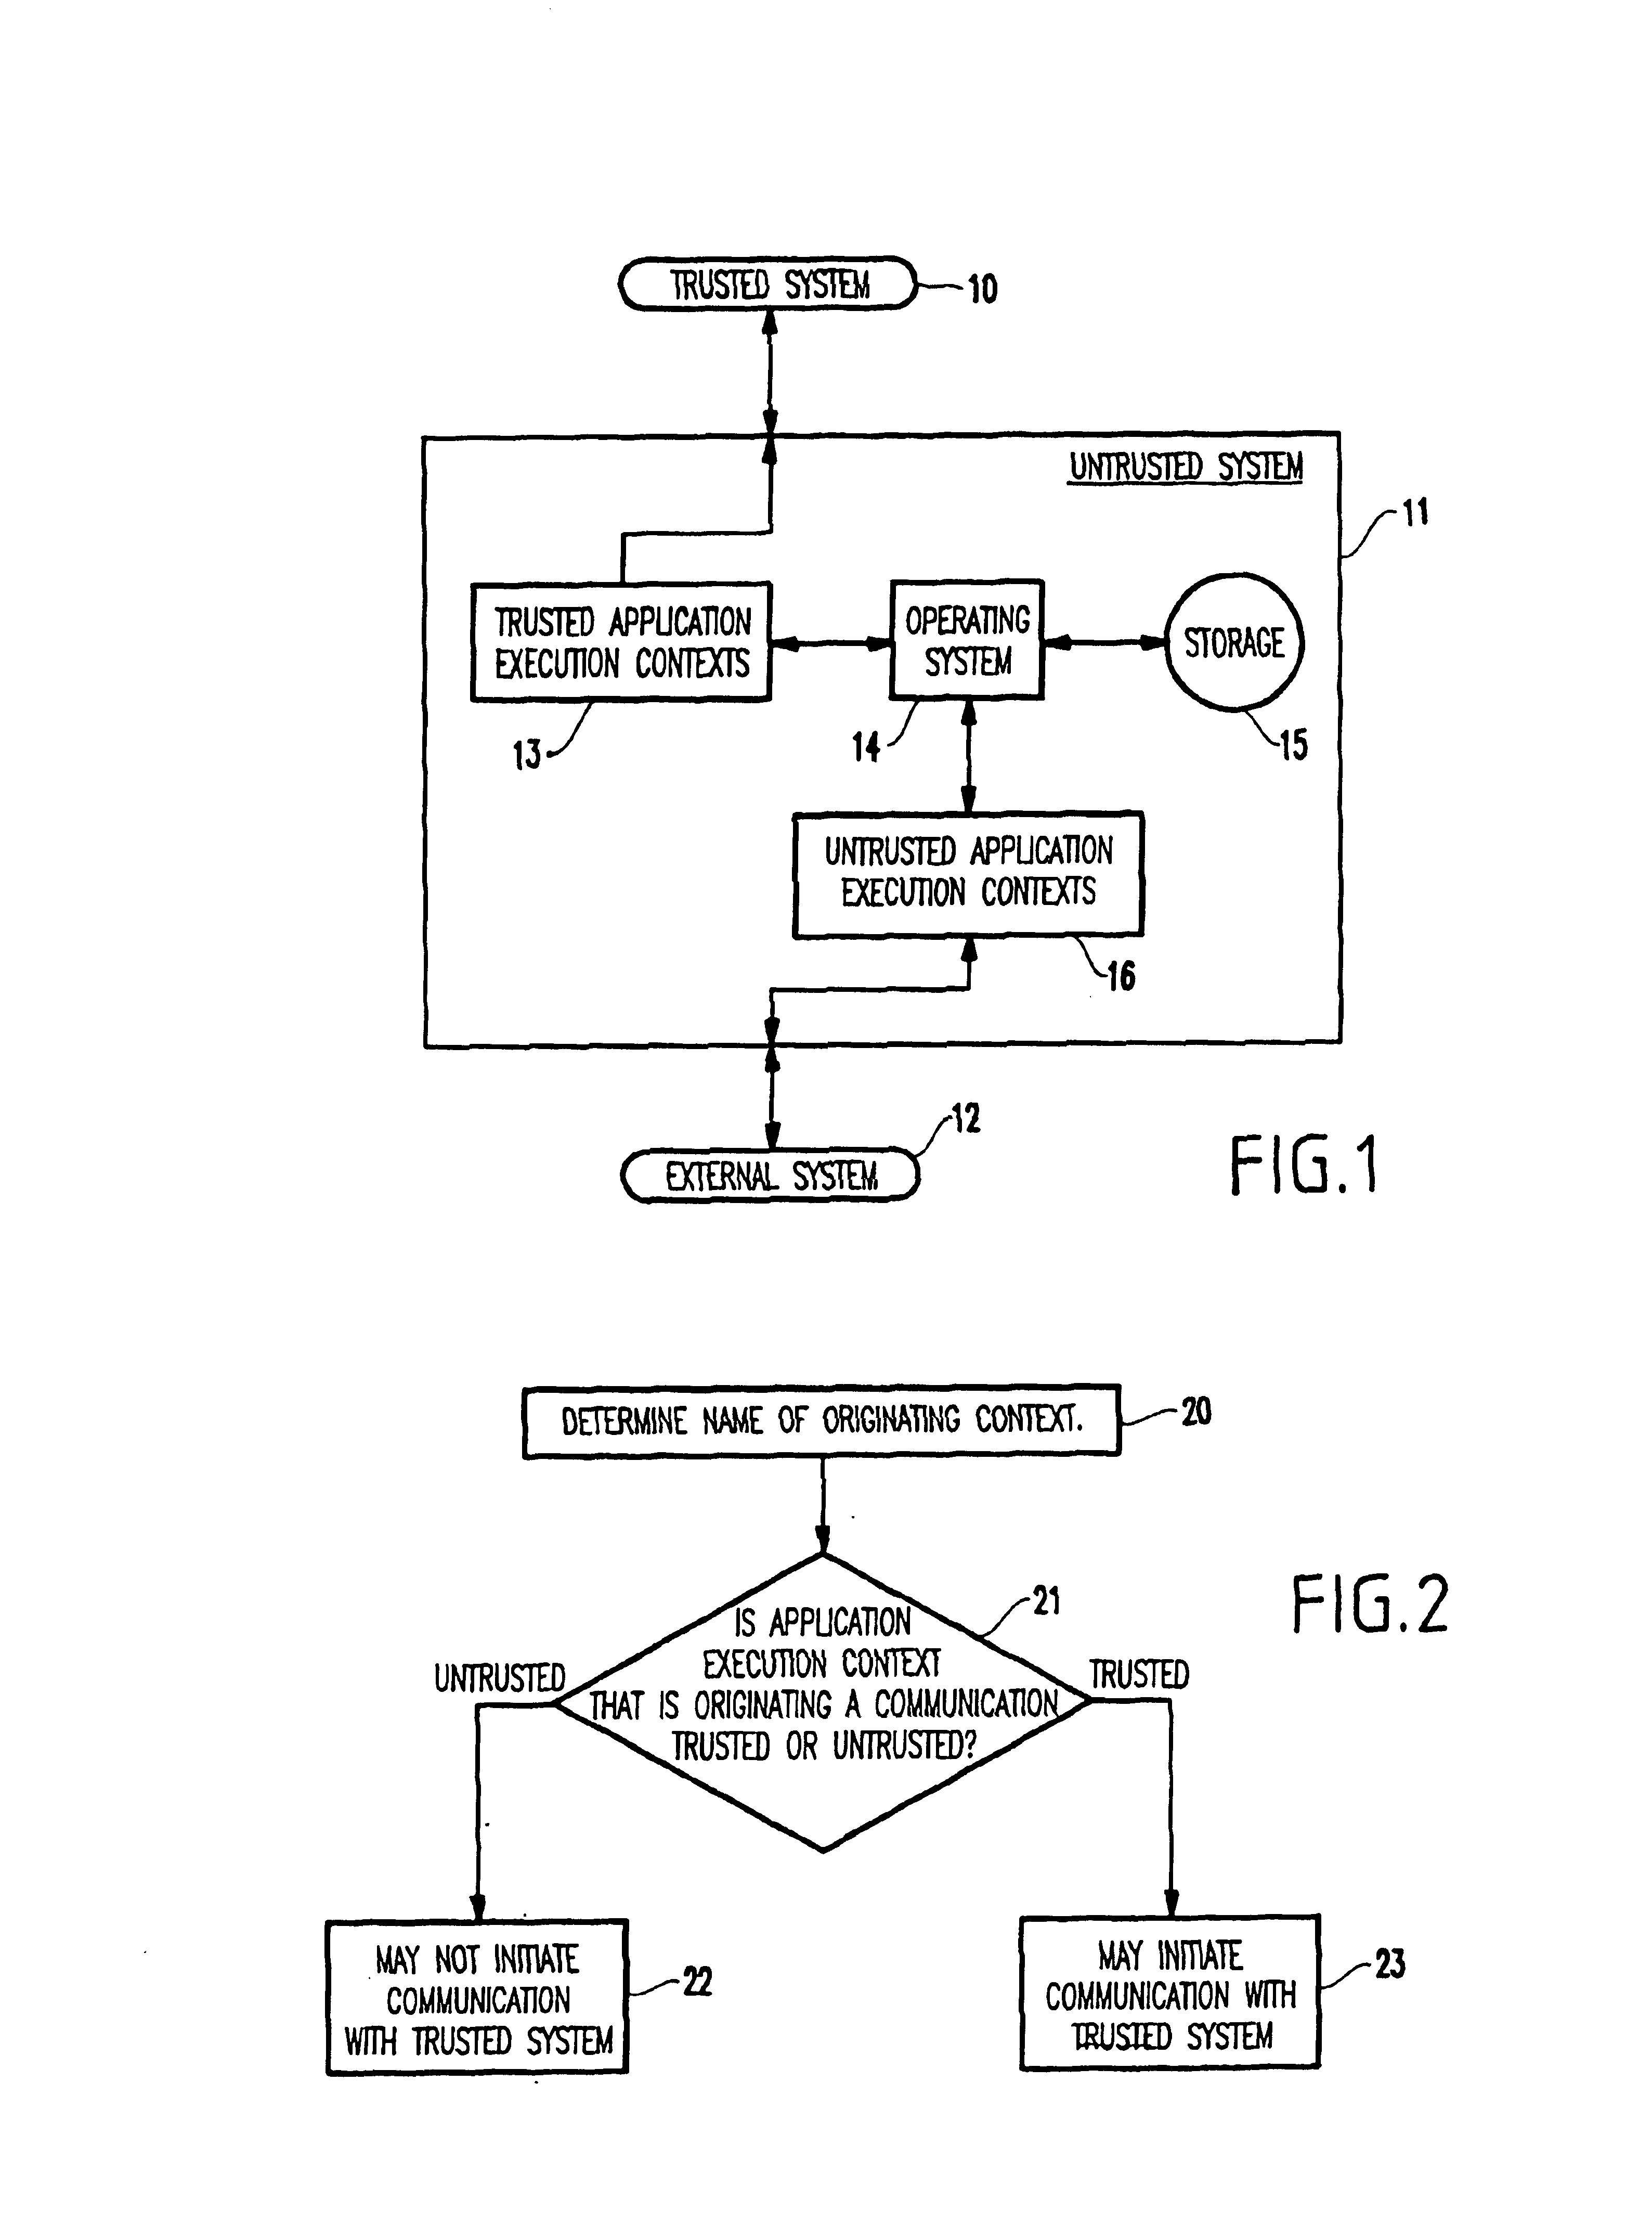 Method and computer system for controlling access by applications to this and other computer systems